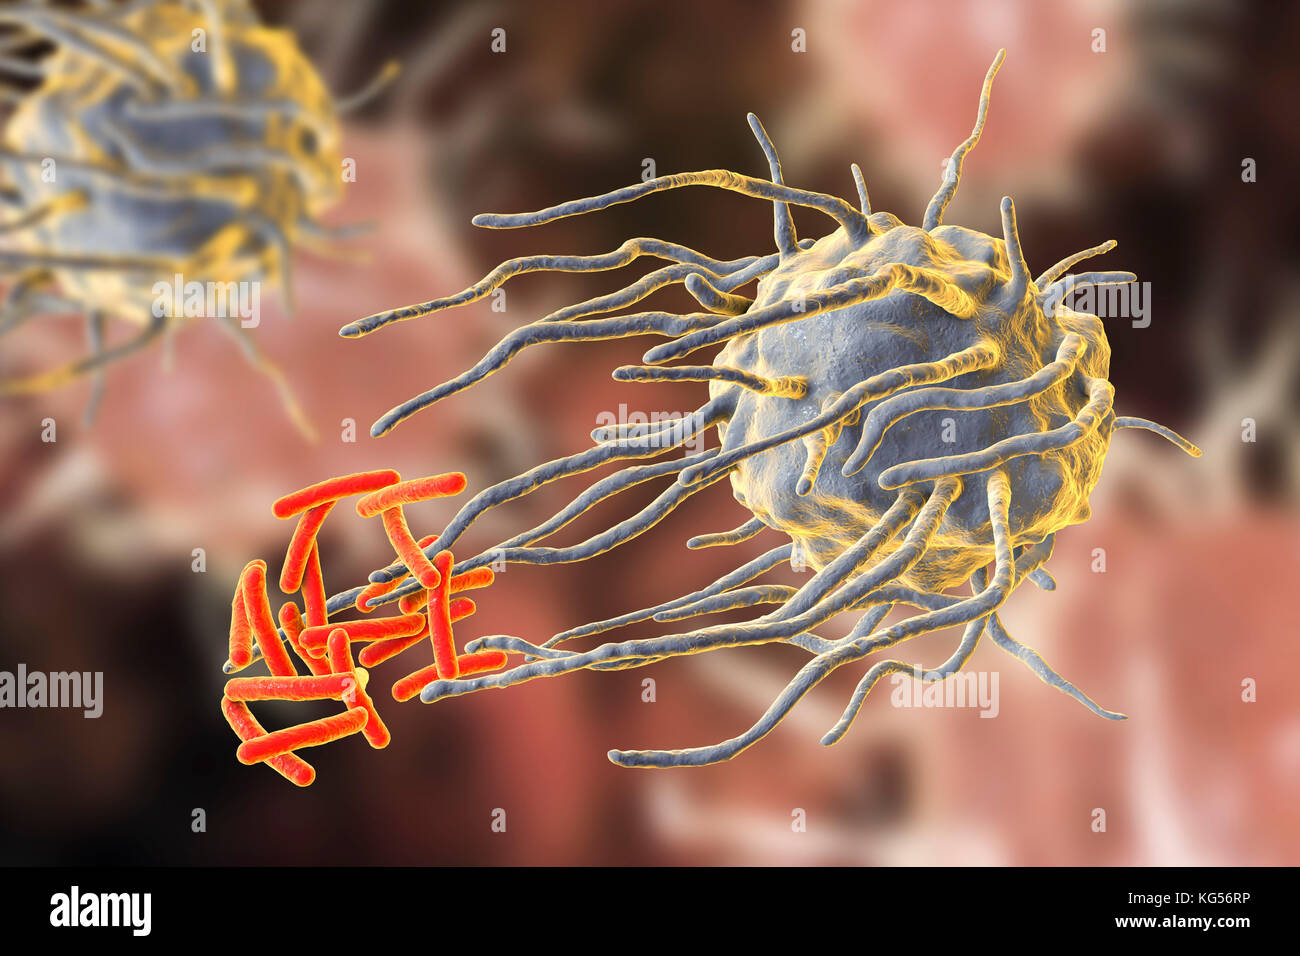 Macrophage engulfing TB bacteria. Computer illustration of a macrophage white blood cell (blue) engulfing tuberculosis (Mycobacterium tuberculosis) bacteria (orange). This process is called phagocytosis. Macrophages are cells of the body's immune system. They phagocytose and destroy pathogens, dead cells and cellular debris. Stock Photo